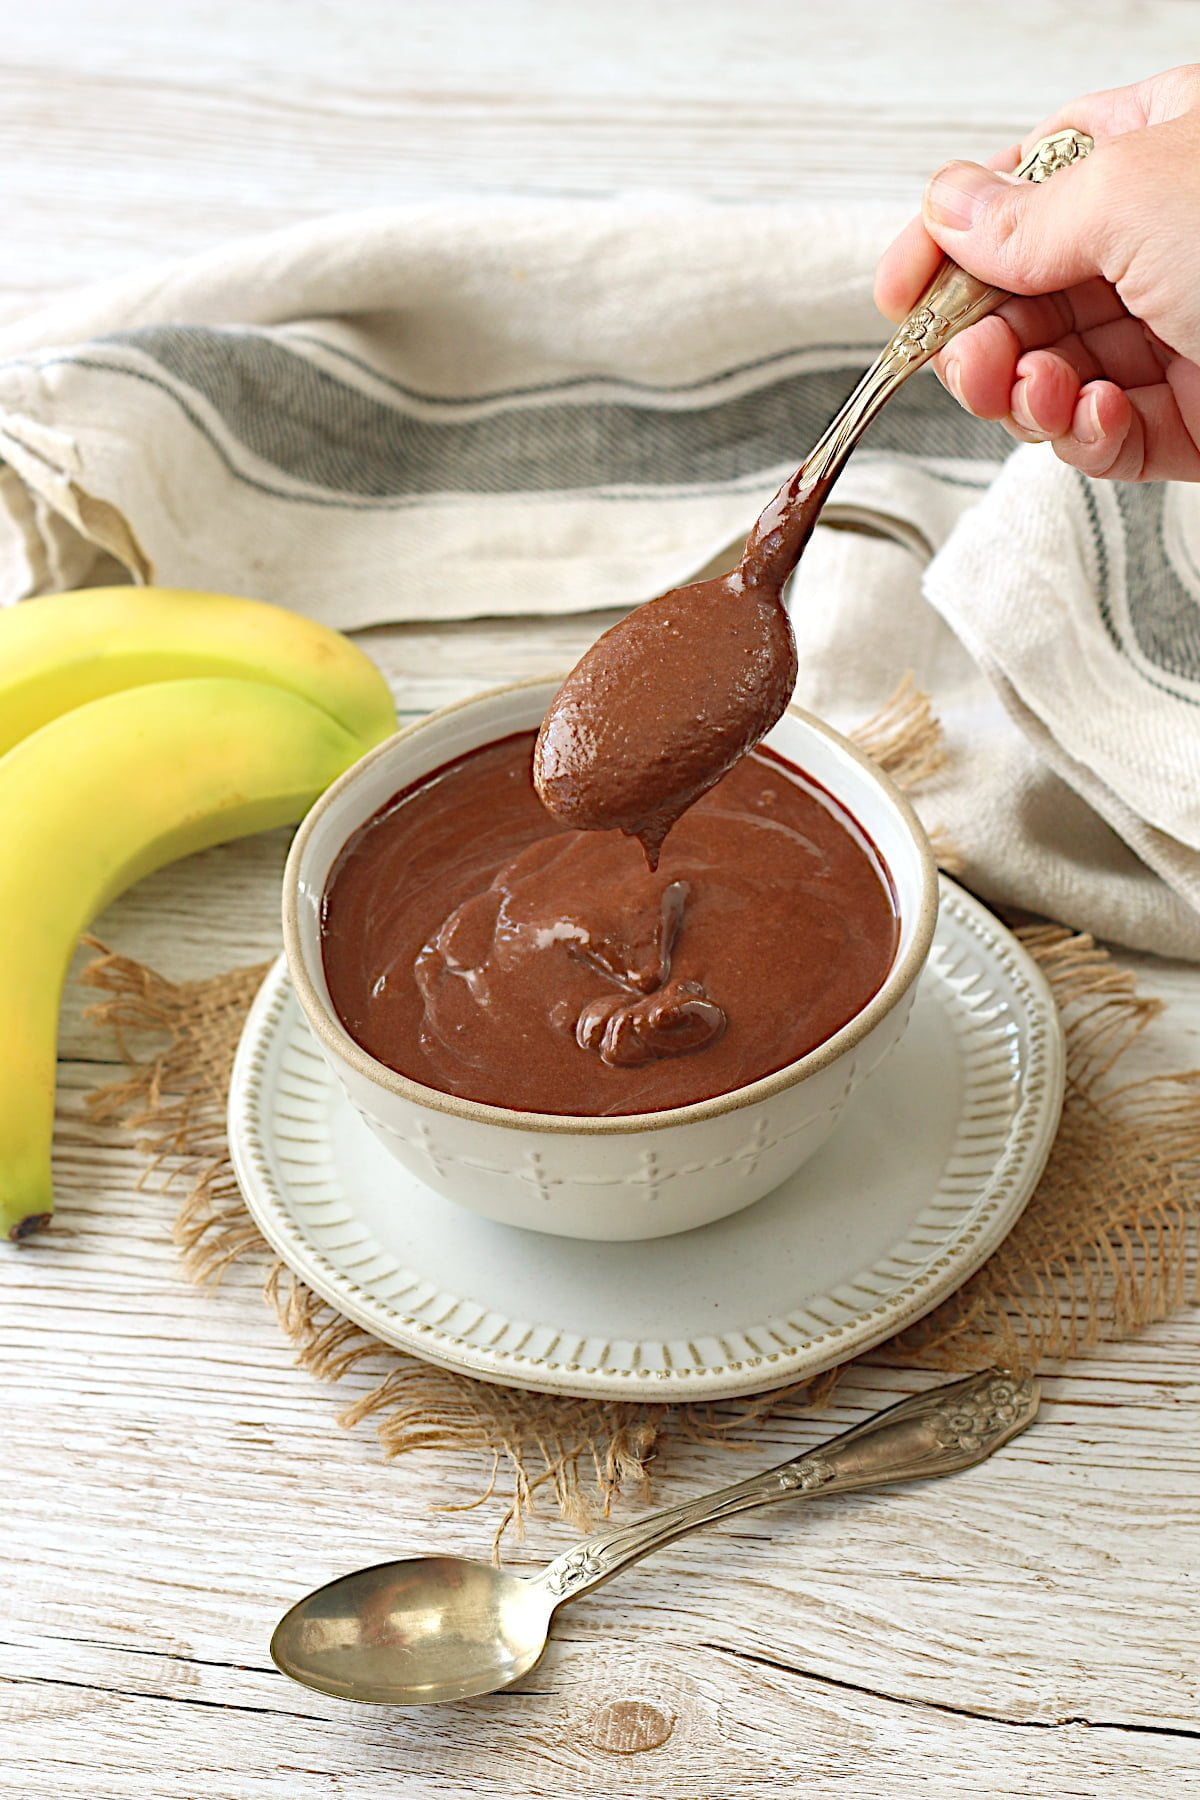 A spoonful of vegan chocolate banana pudding being scooped from a white bowl.